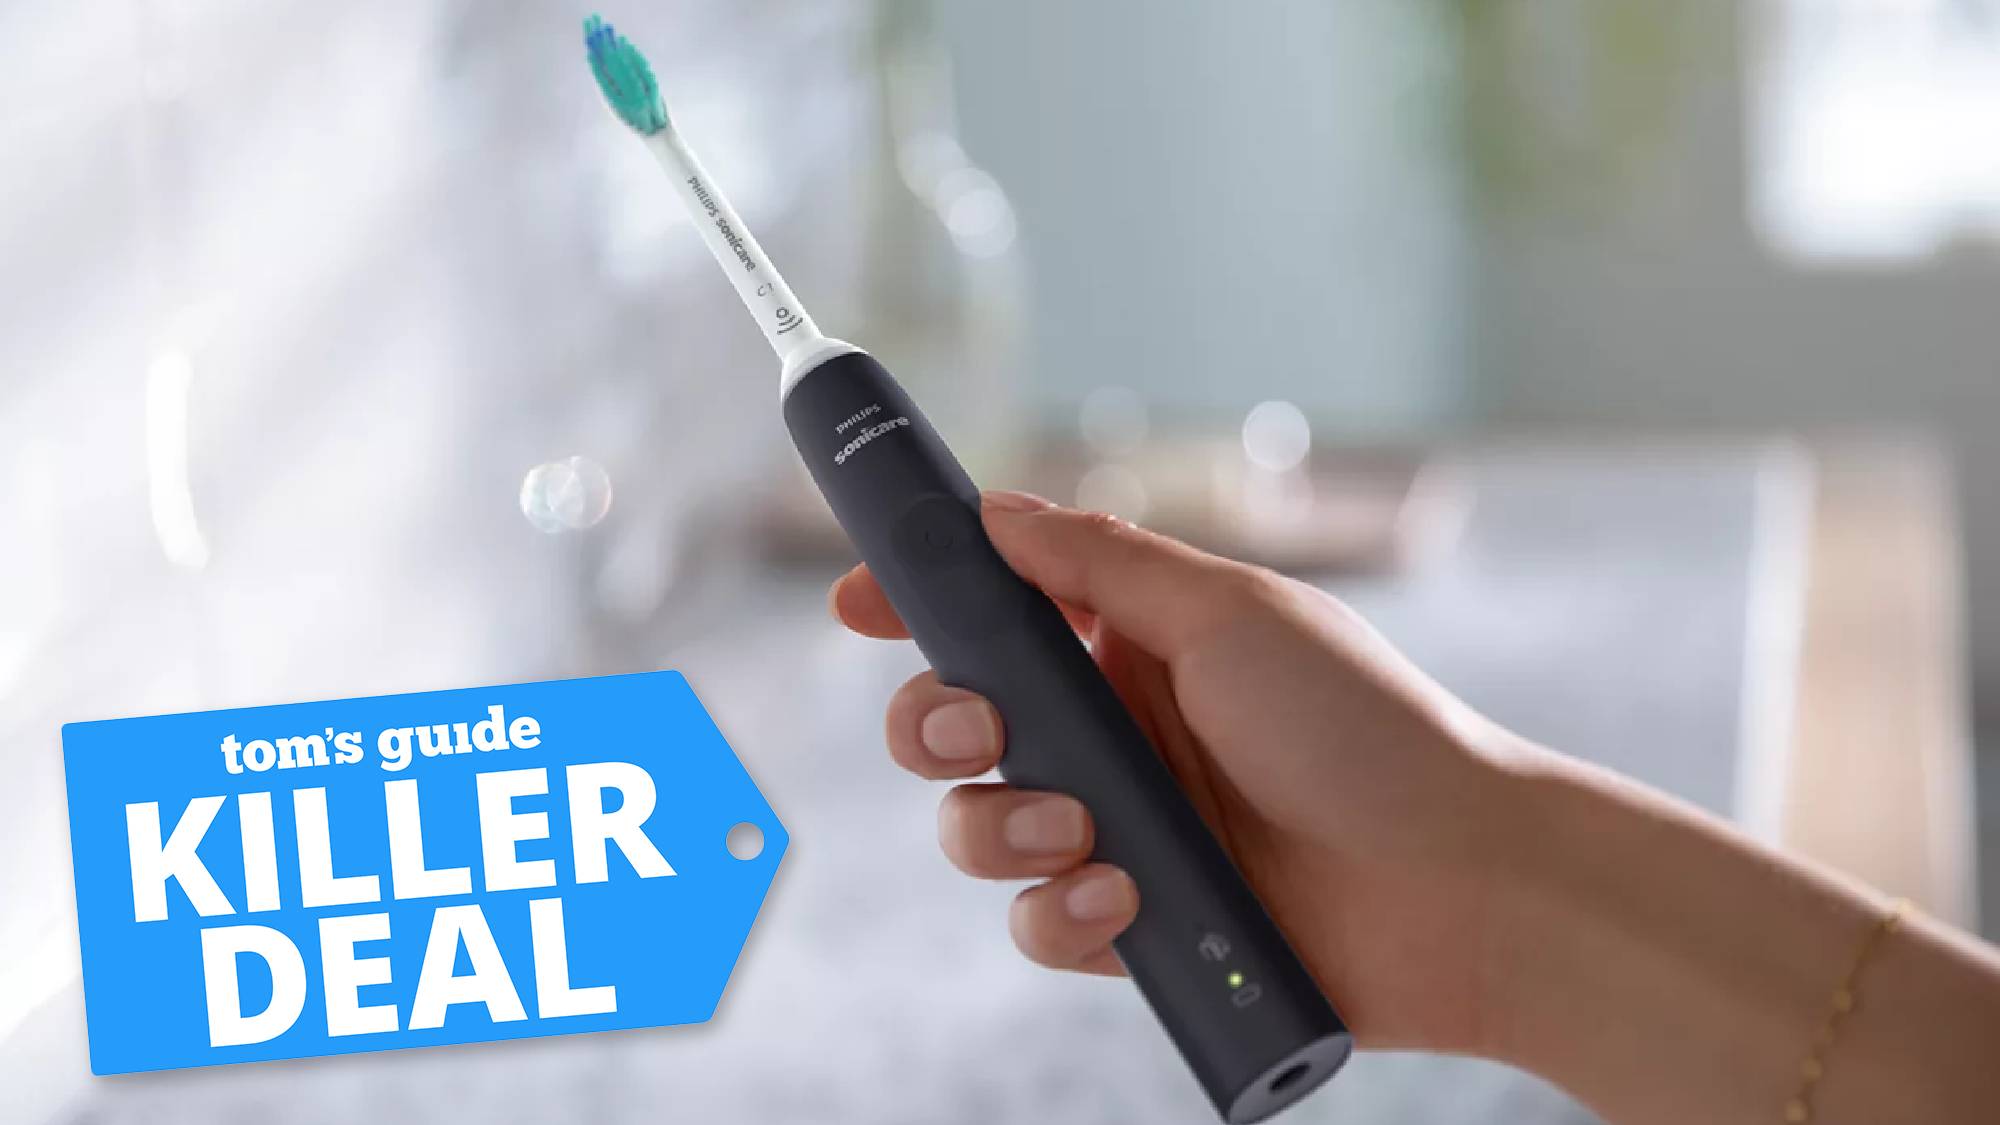 Philips electric toothbrush with a Tom's Guide deal tag